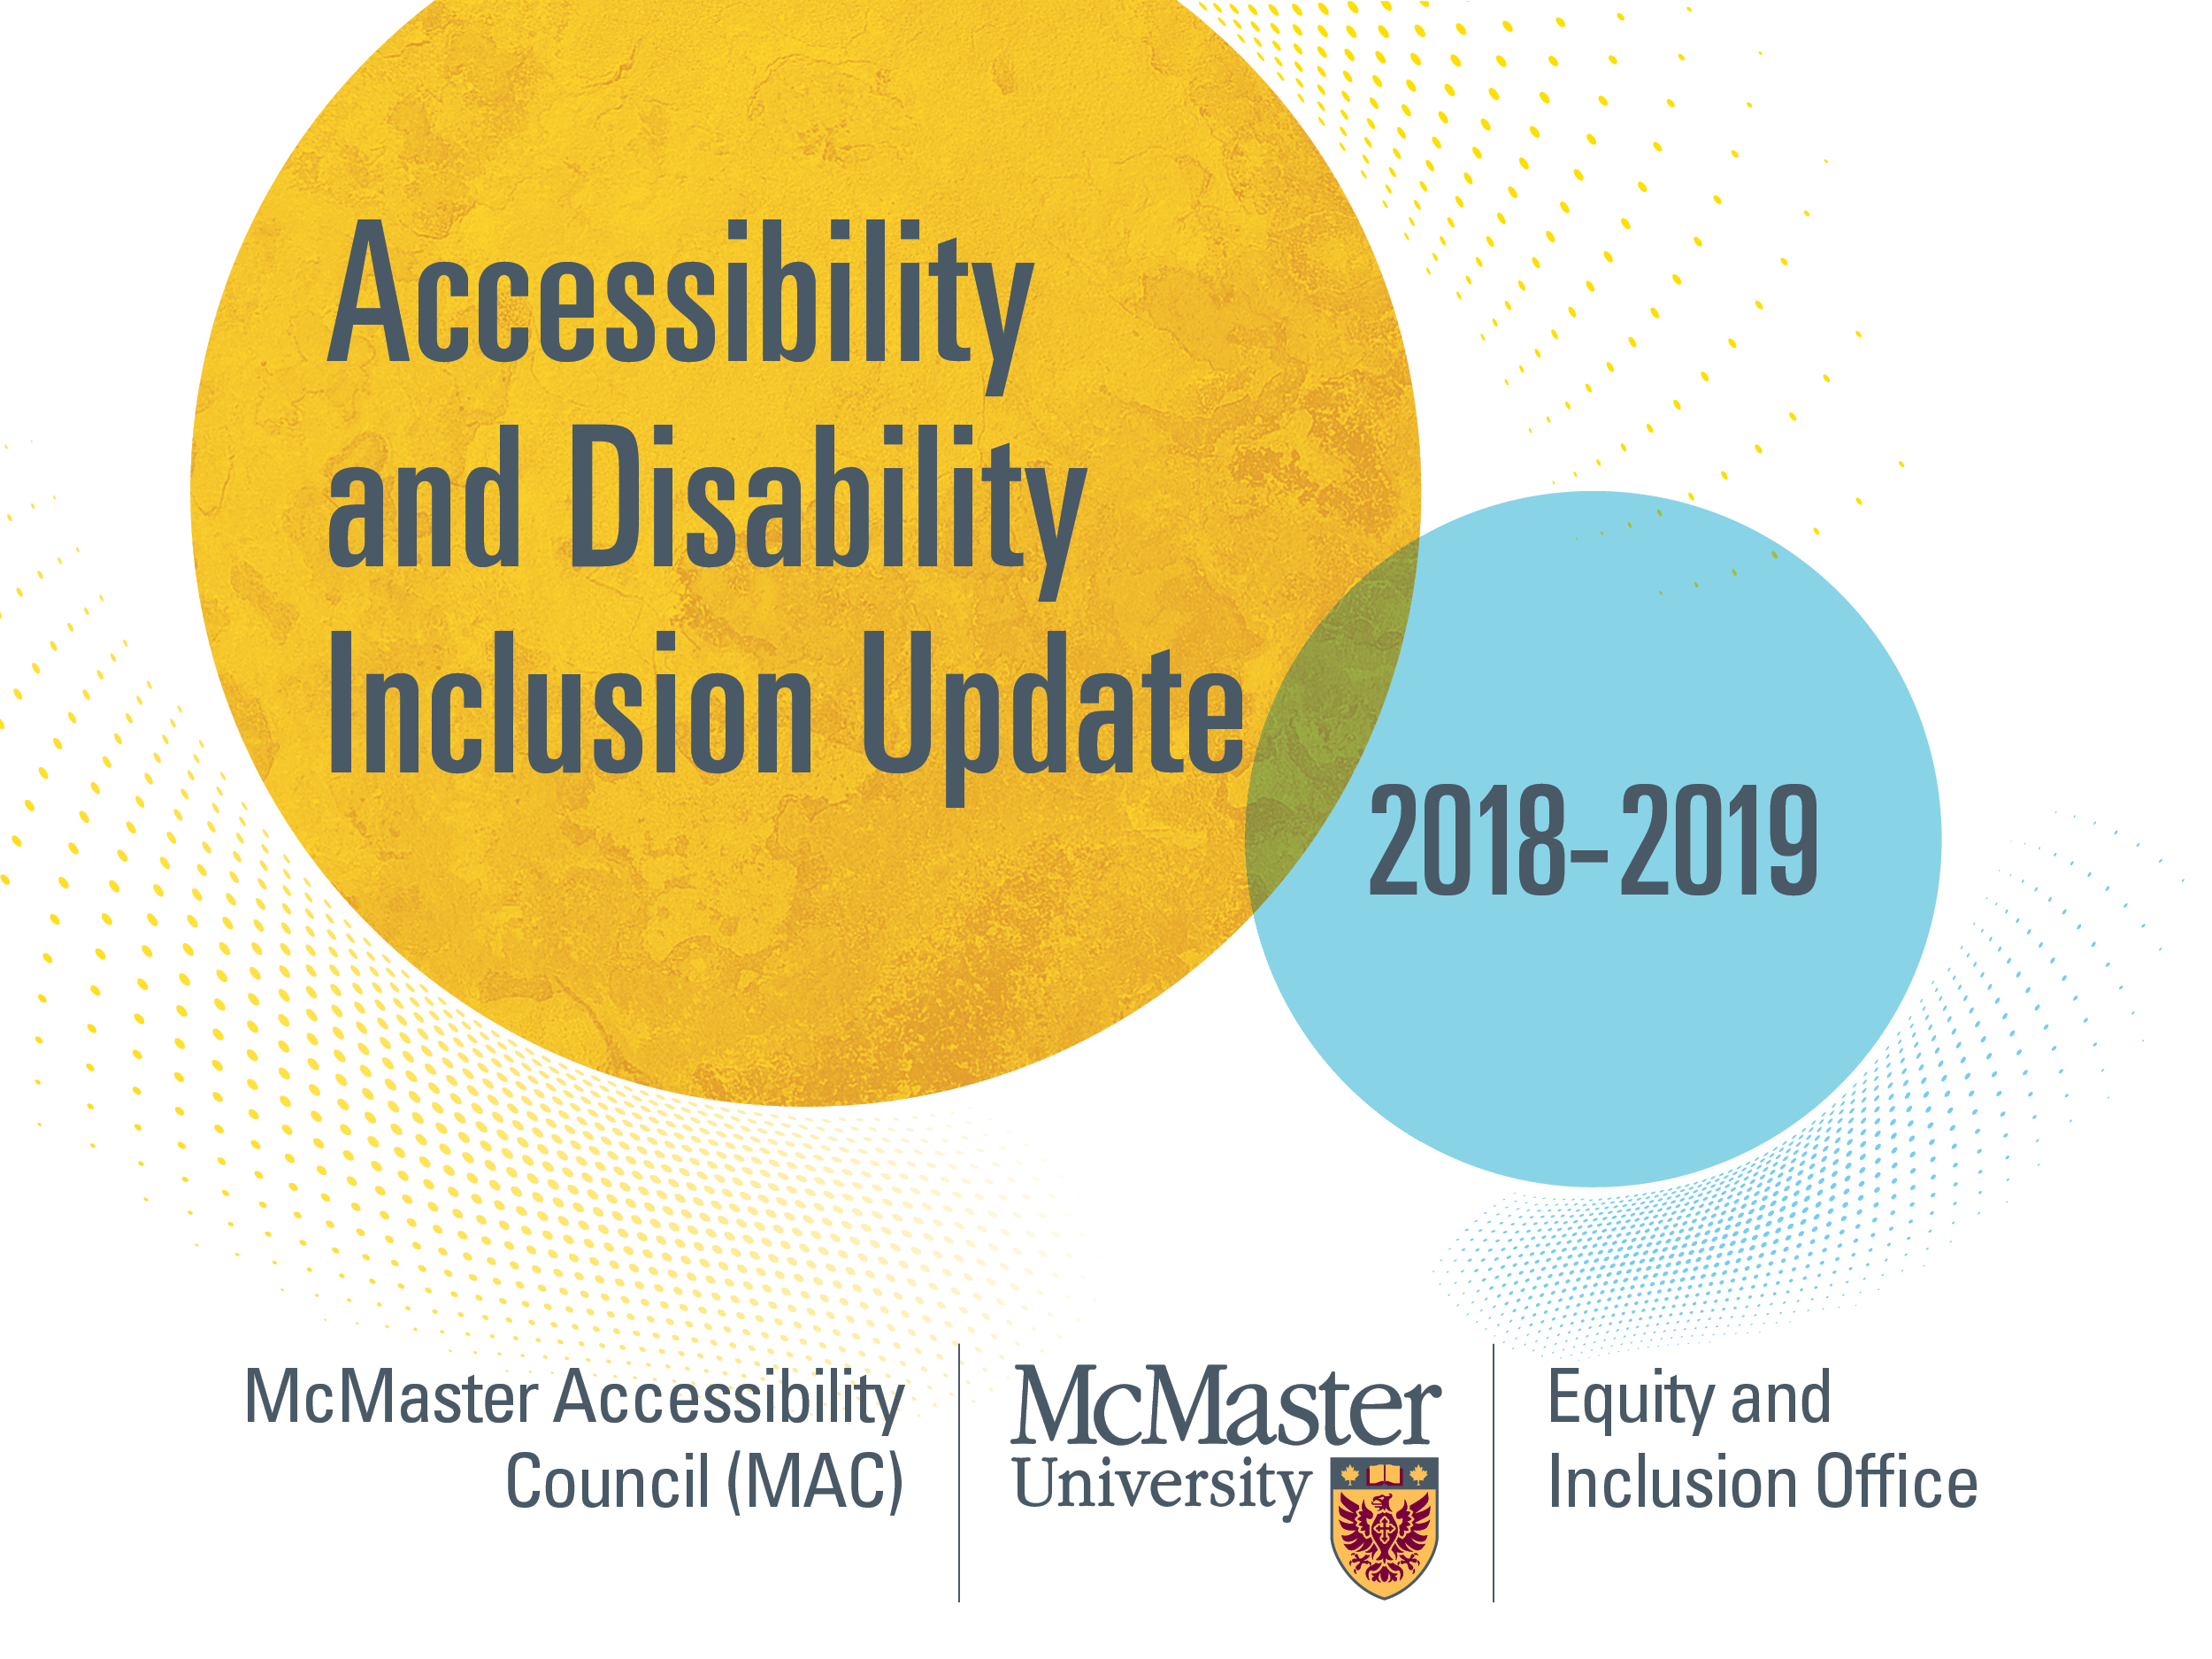 The official cover page for the Accessibility and Disability Inclusion Update for 2018-2019.